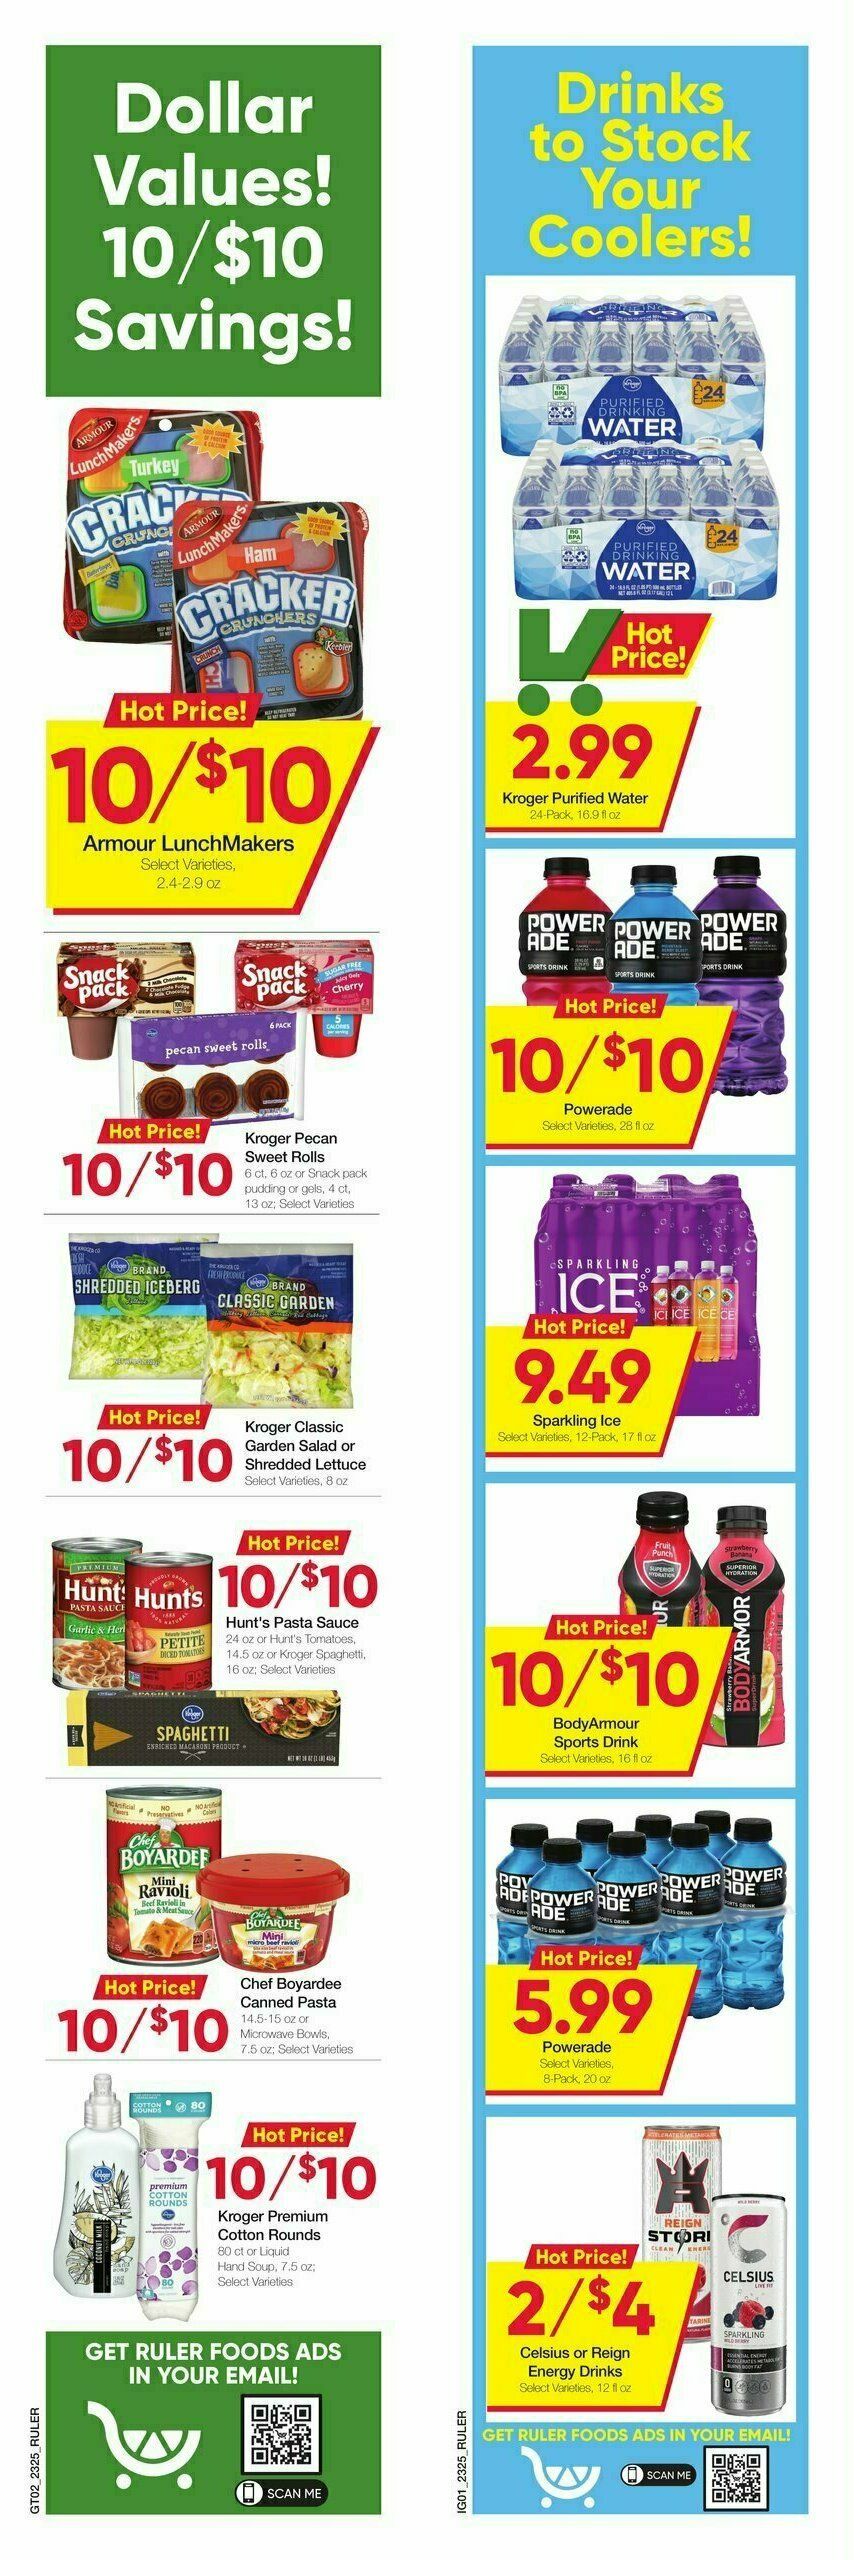 Ruler Foods Weekly Ad from July 19